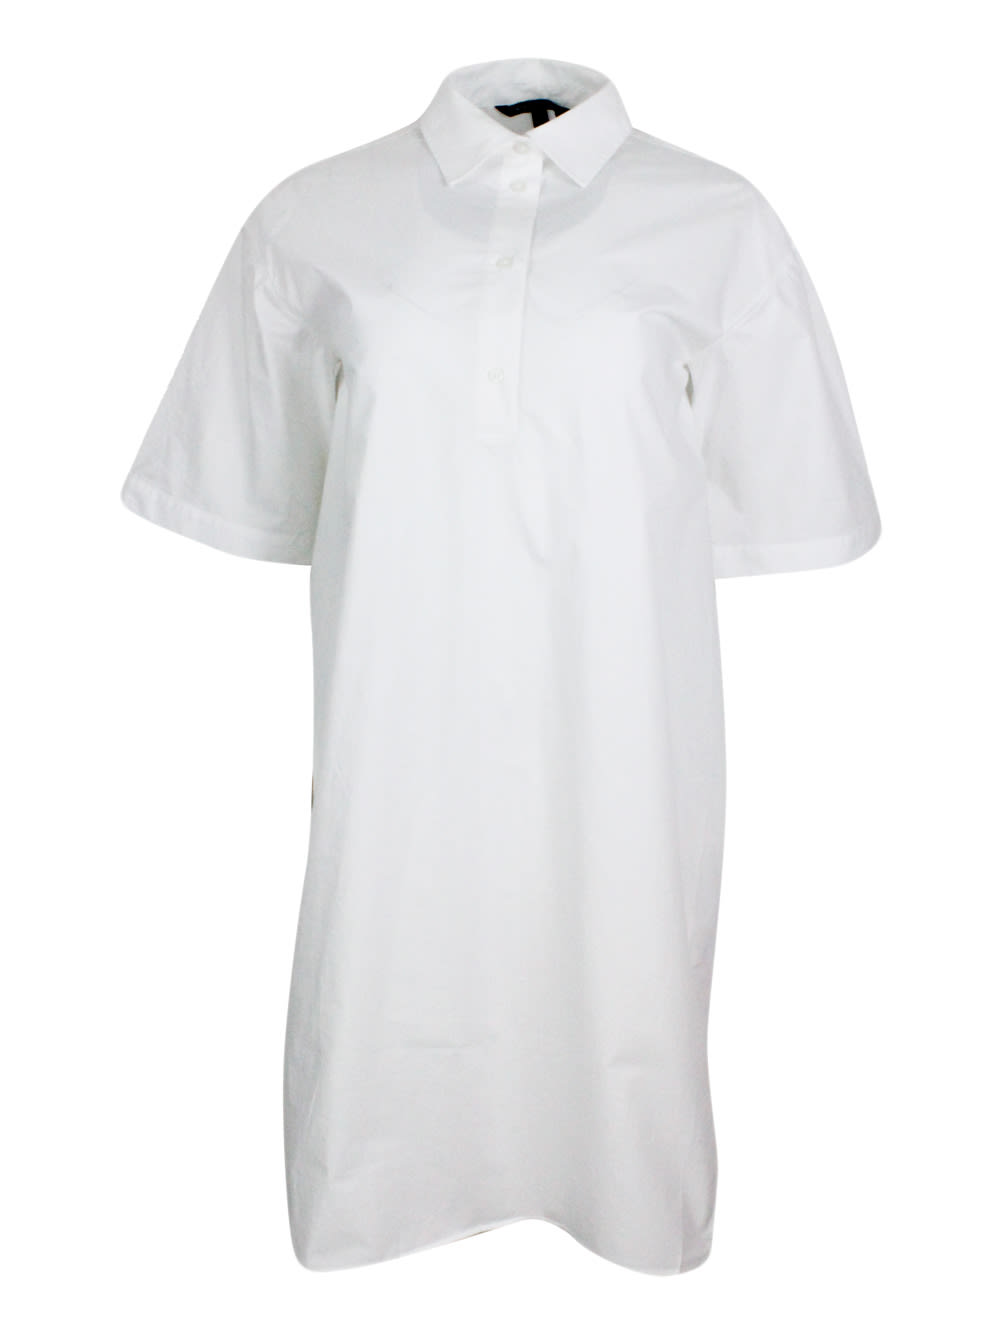 Dress Made Of Soft Cotton With Short Sleeves, With Collar And 4 Button Closure. Side Slits On The Bottom.